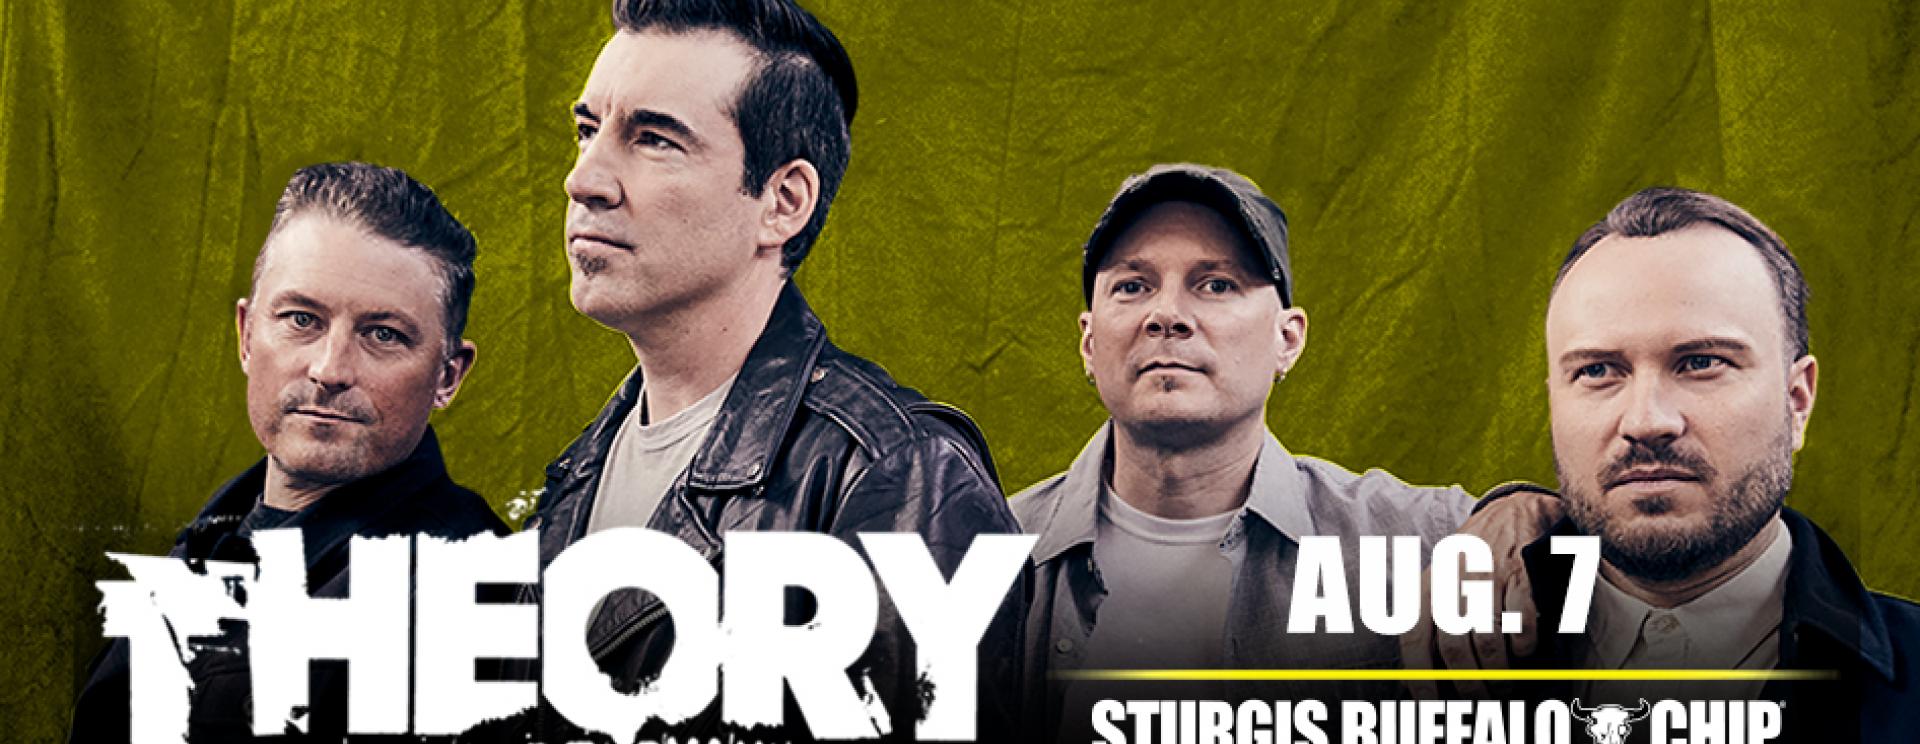 Theory of a Deadman Concert at Sturgis Buffalo Chip 